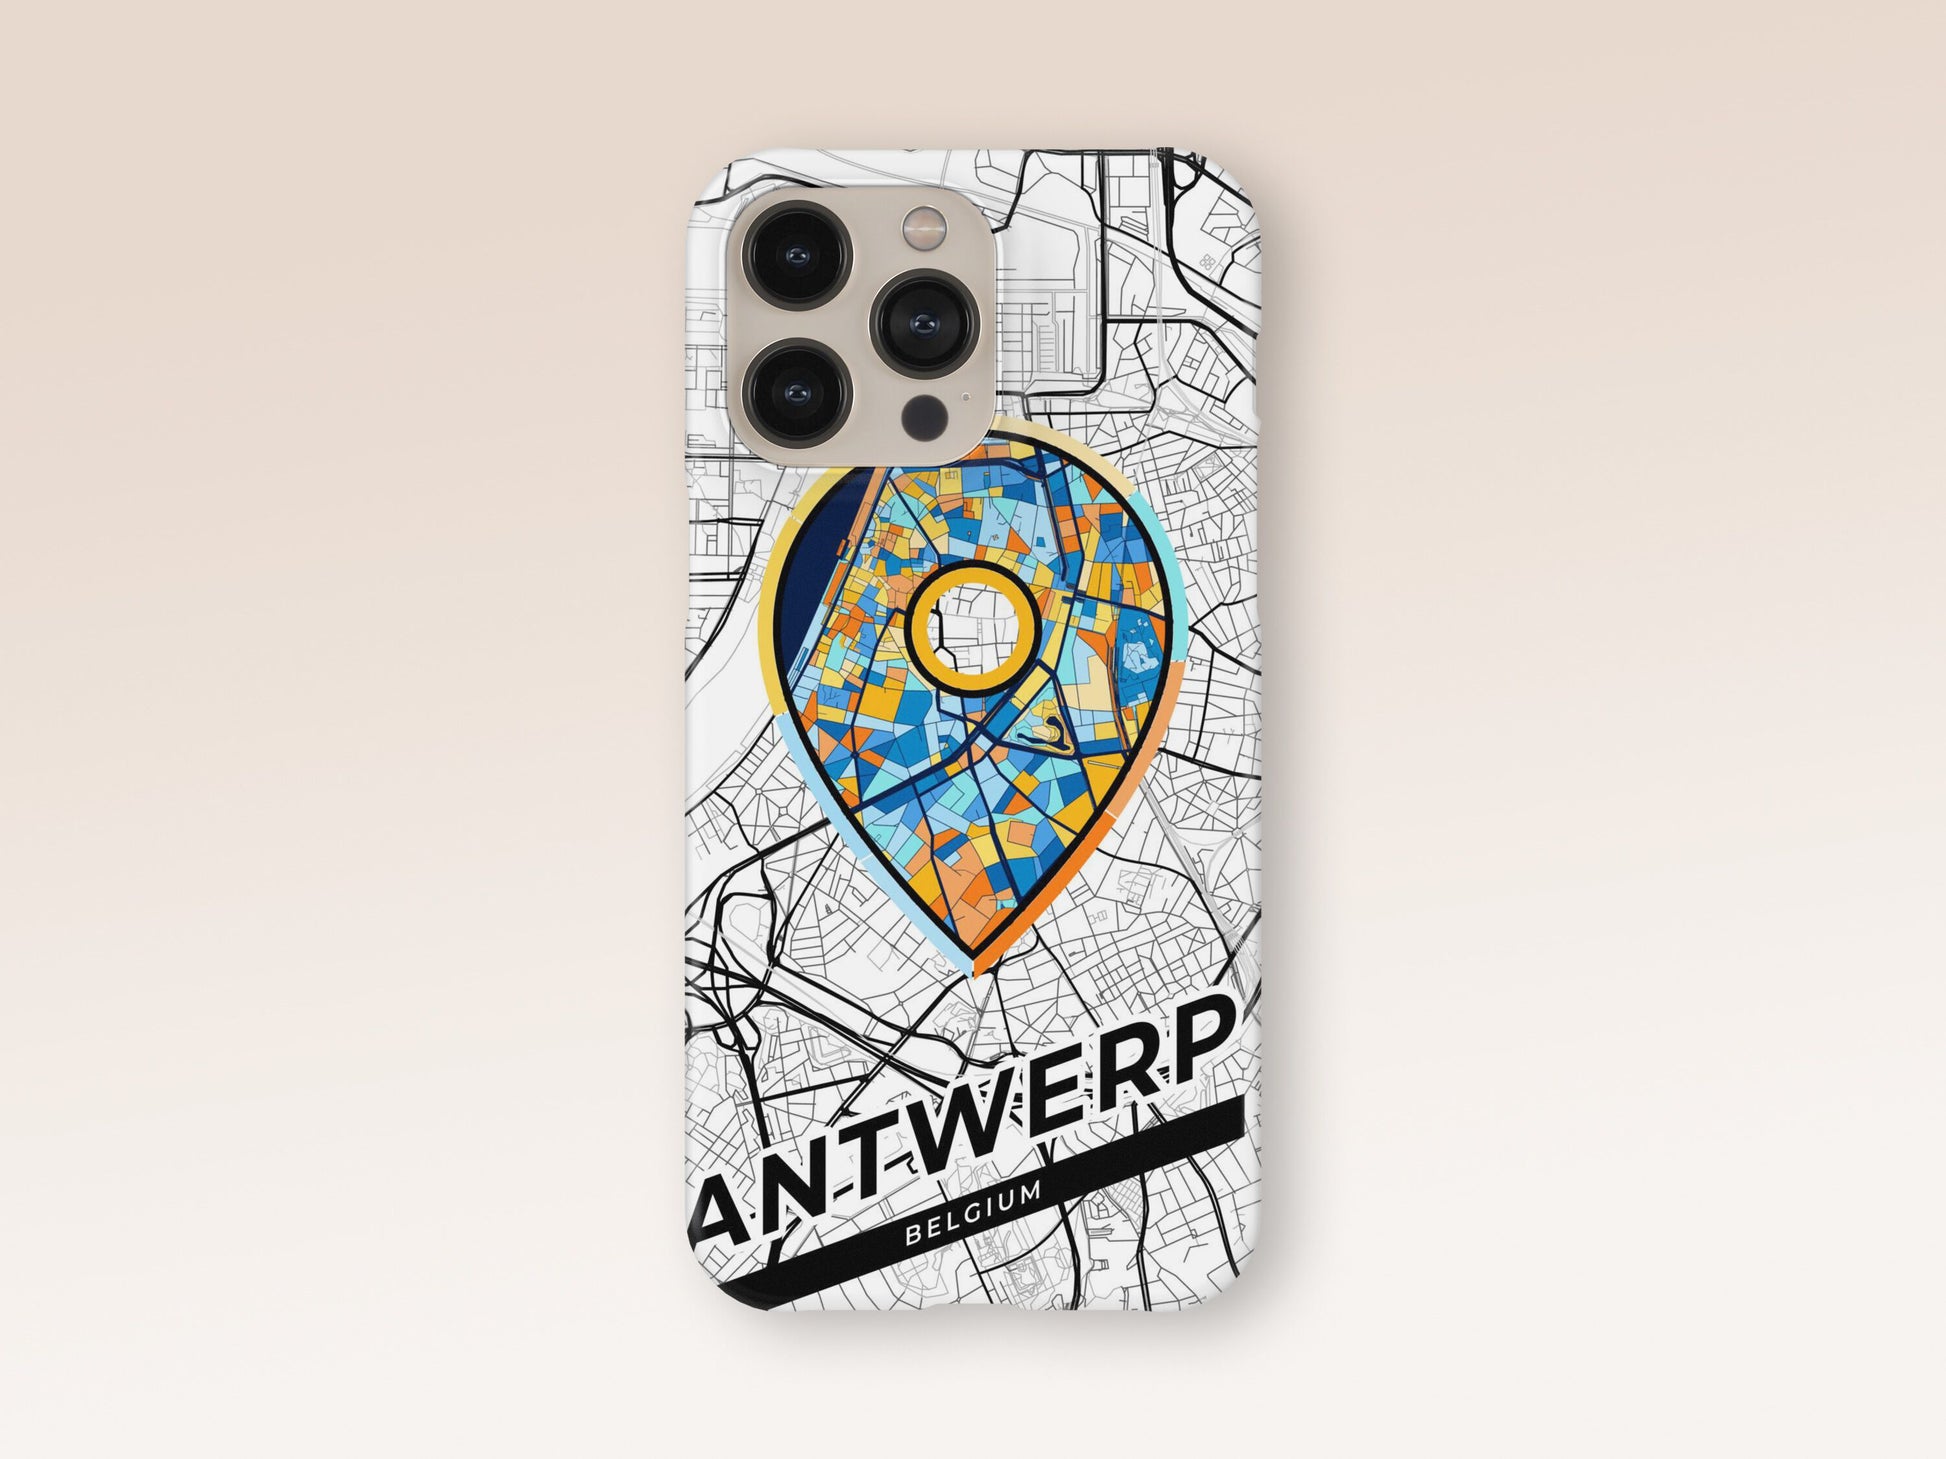 Antwerp Belgium slim phone case with colorful icon. Birthday, wedding or housewarming gift. Couple match cases. 1